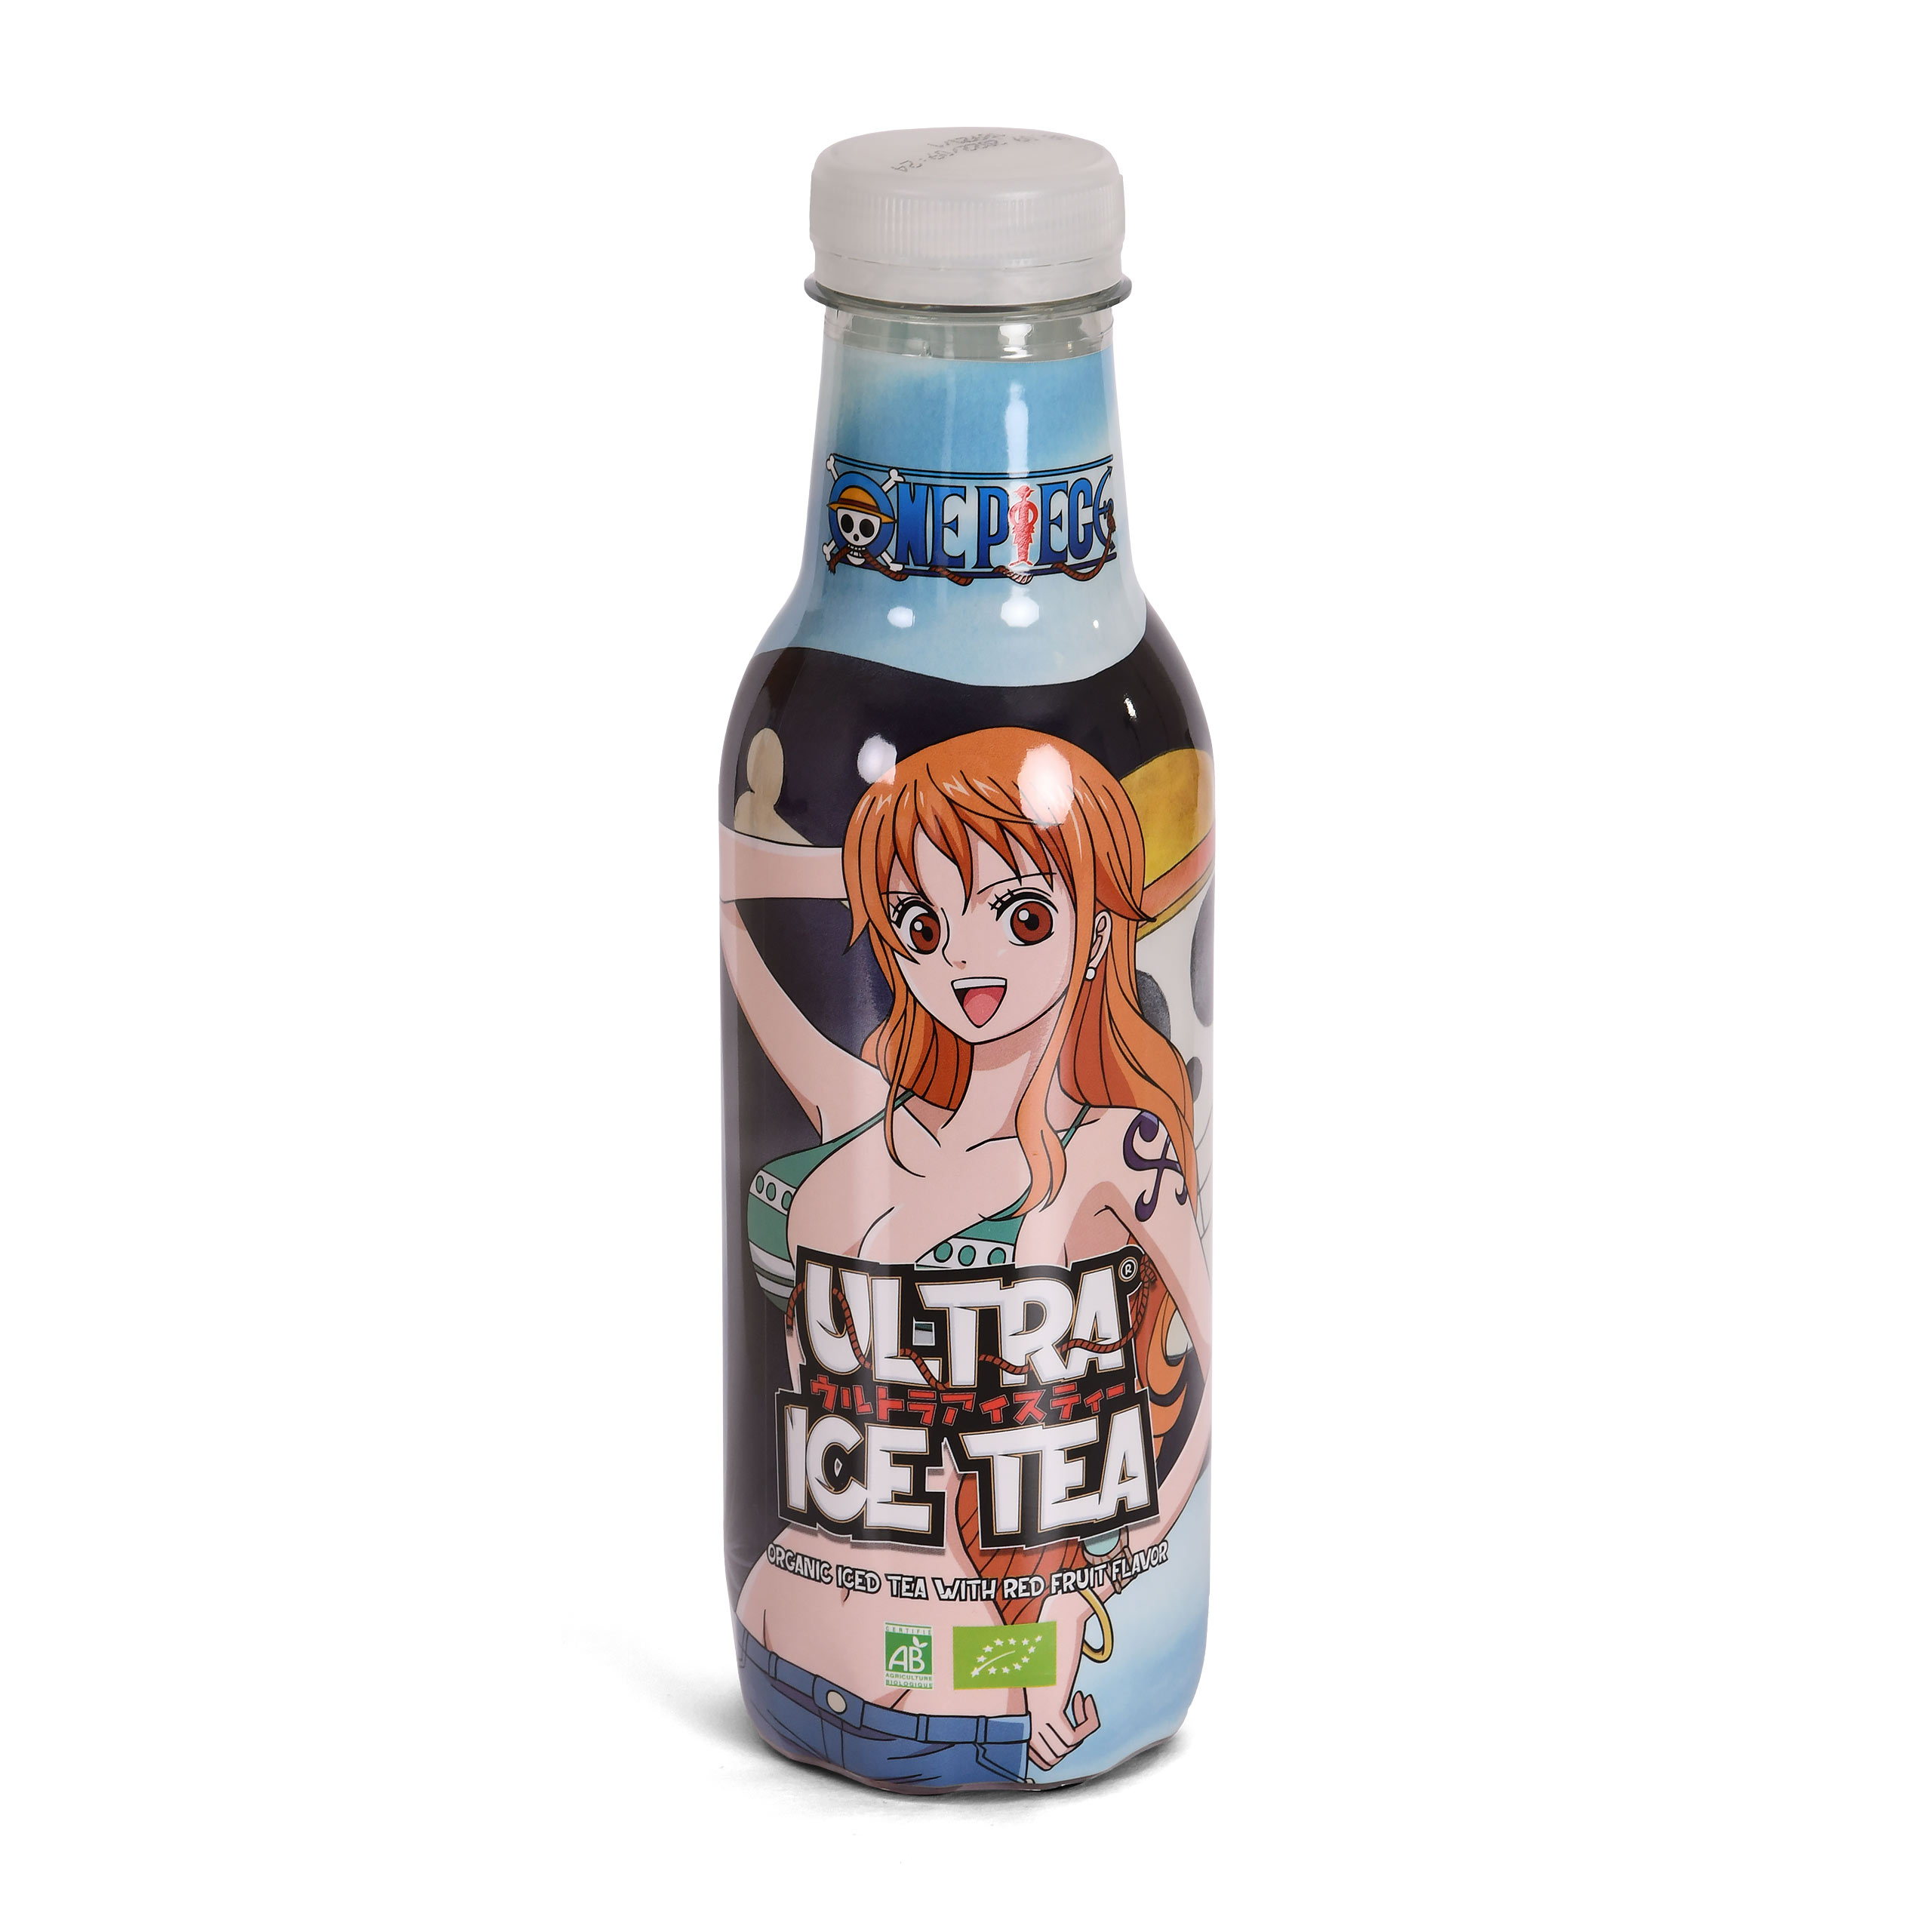 One Piece - Nami Ultra Organic Iced Tea Red Fruits 12 Pack